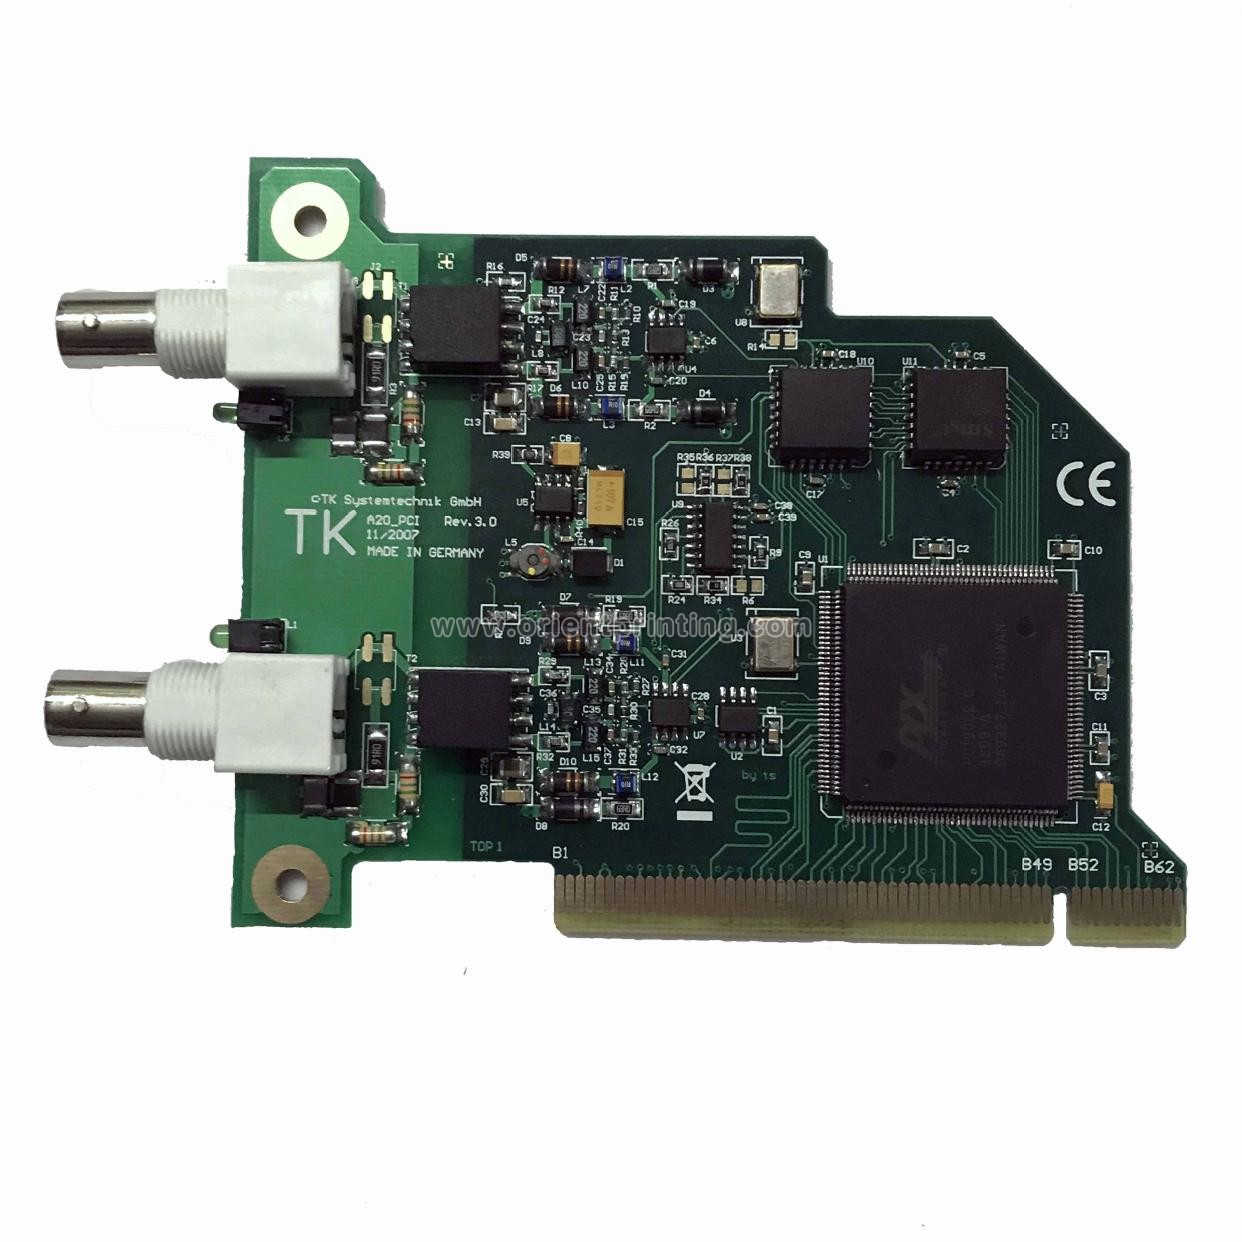 TK Systemtechnik GmbH A20_PCI Board For KBA ,KBA Offset Spare Parts